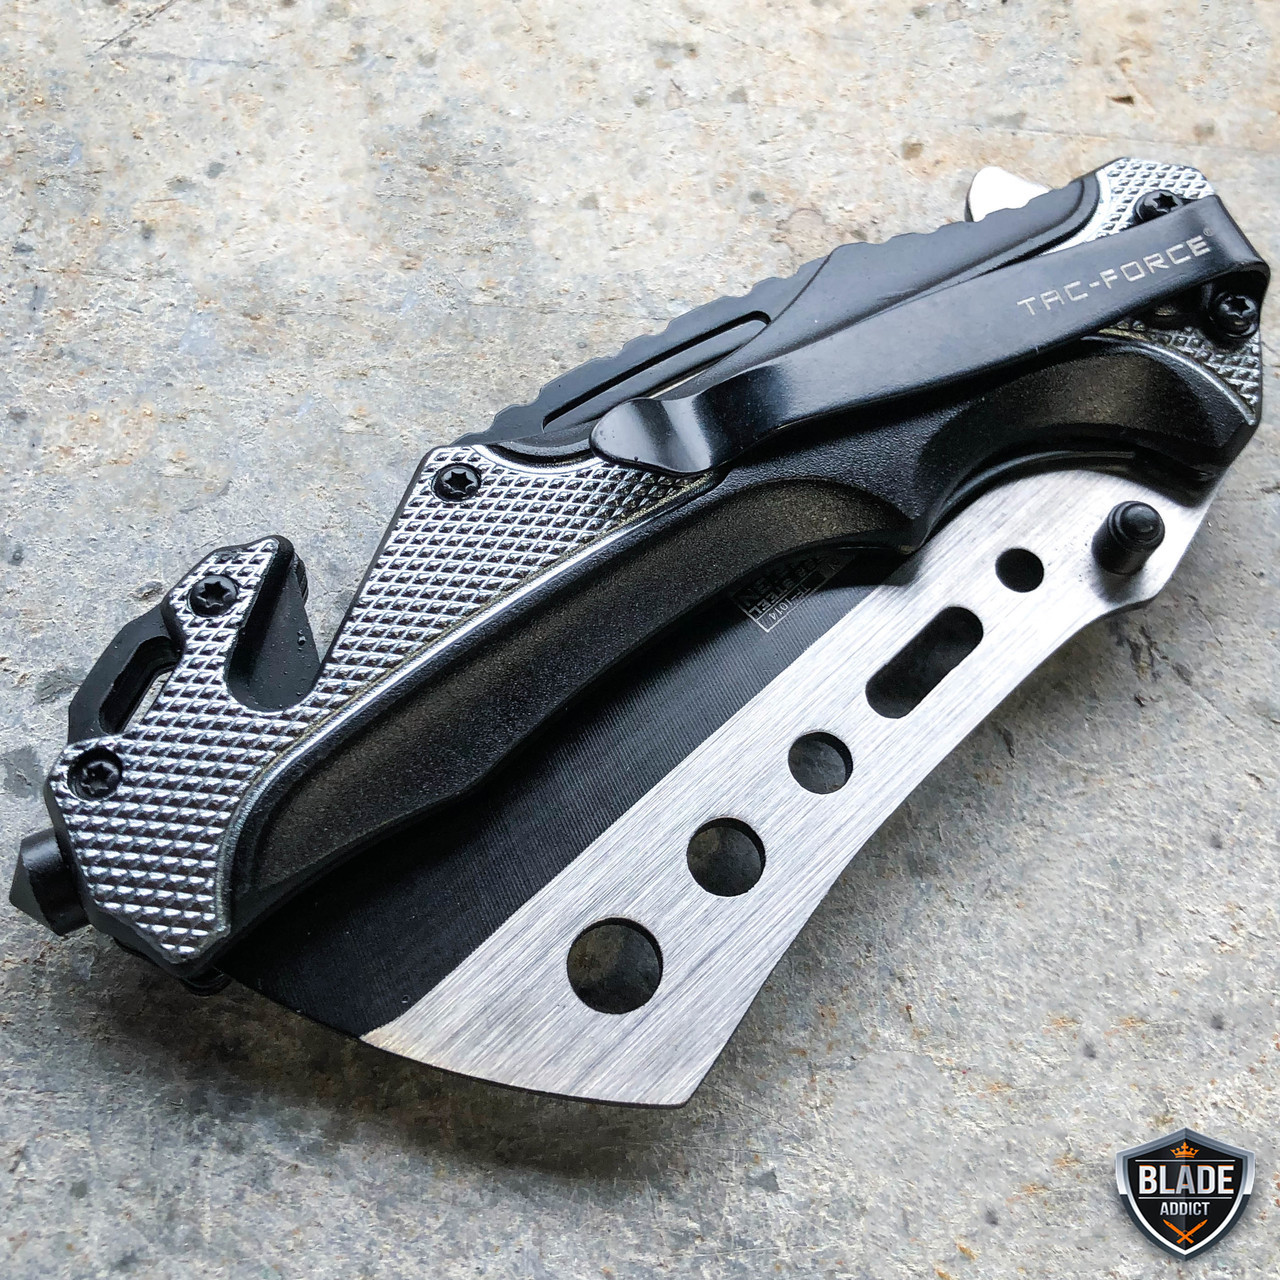 Gray Spring-Assist Folding KnifeTac-Force 3.5" Sheepsfoot Blade Rescue EDC 